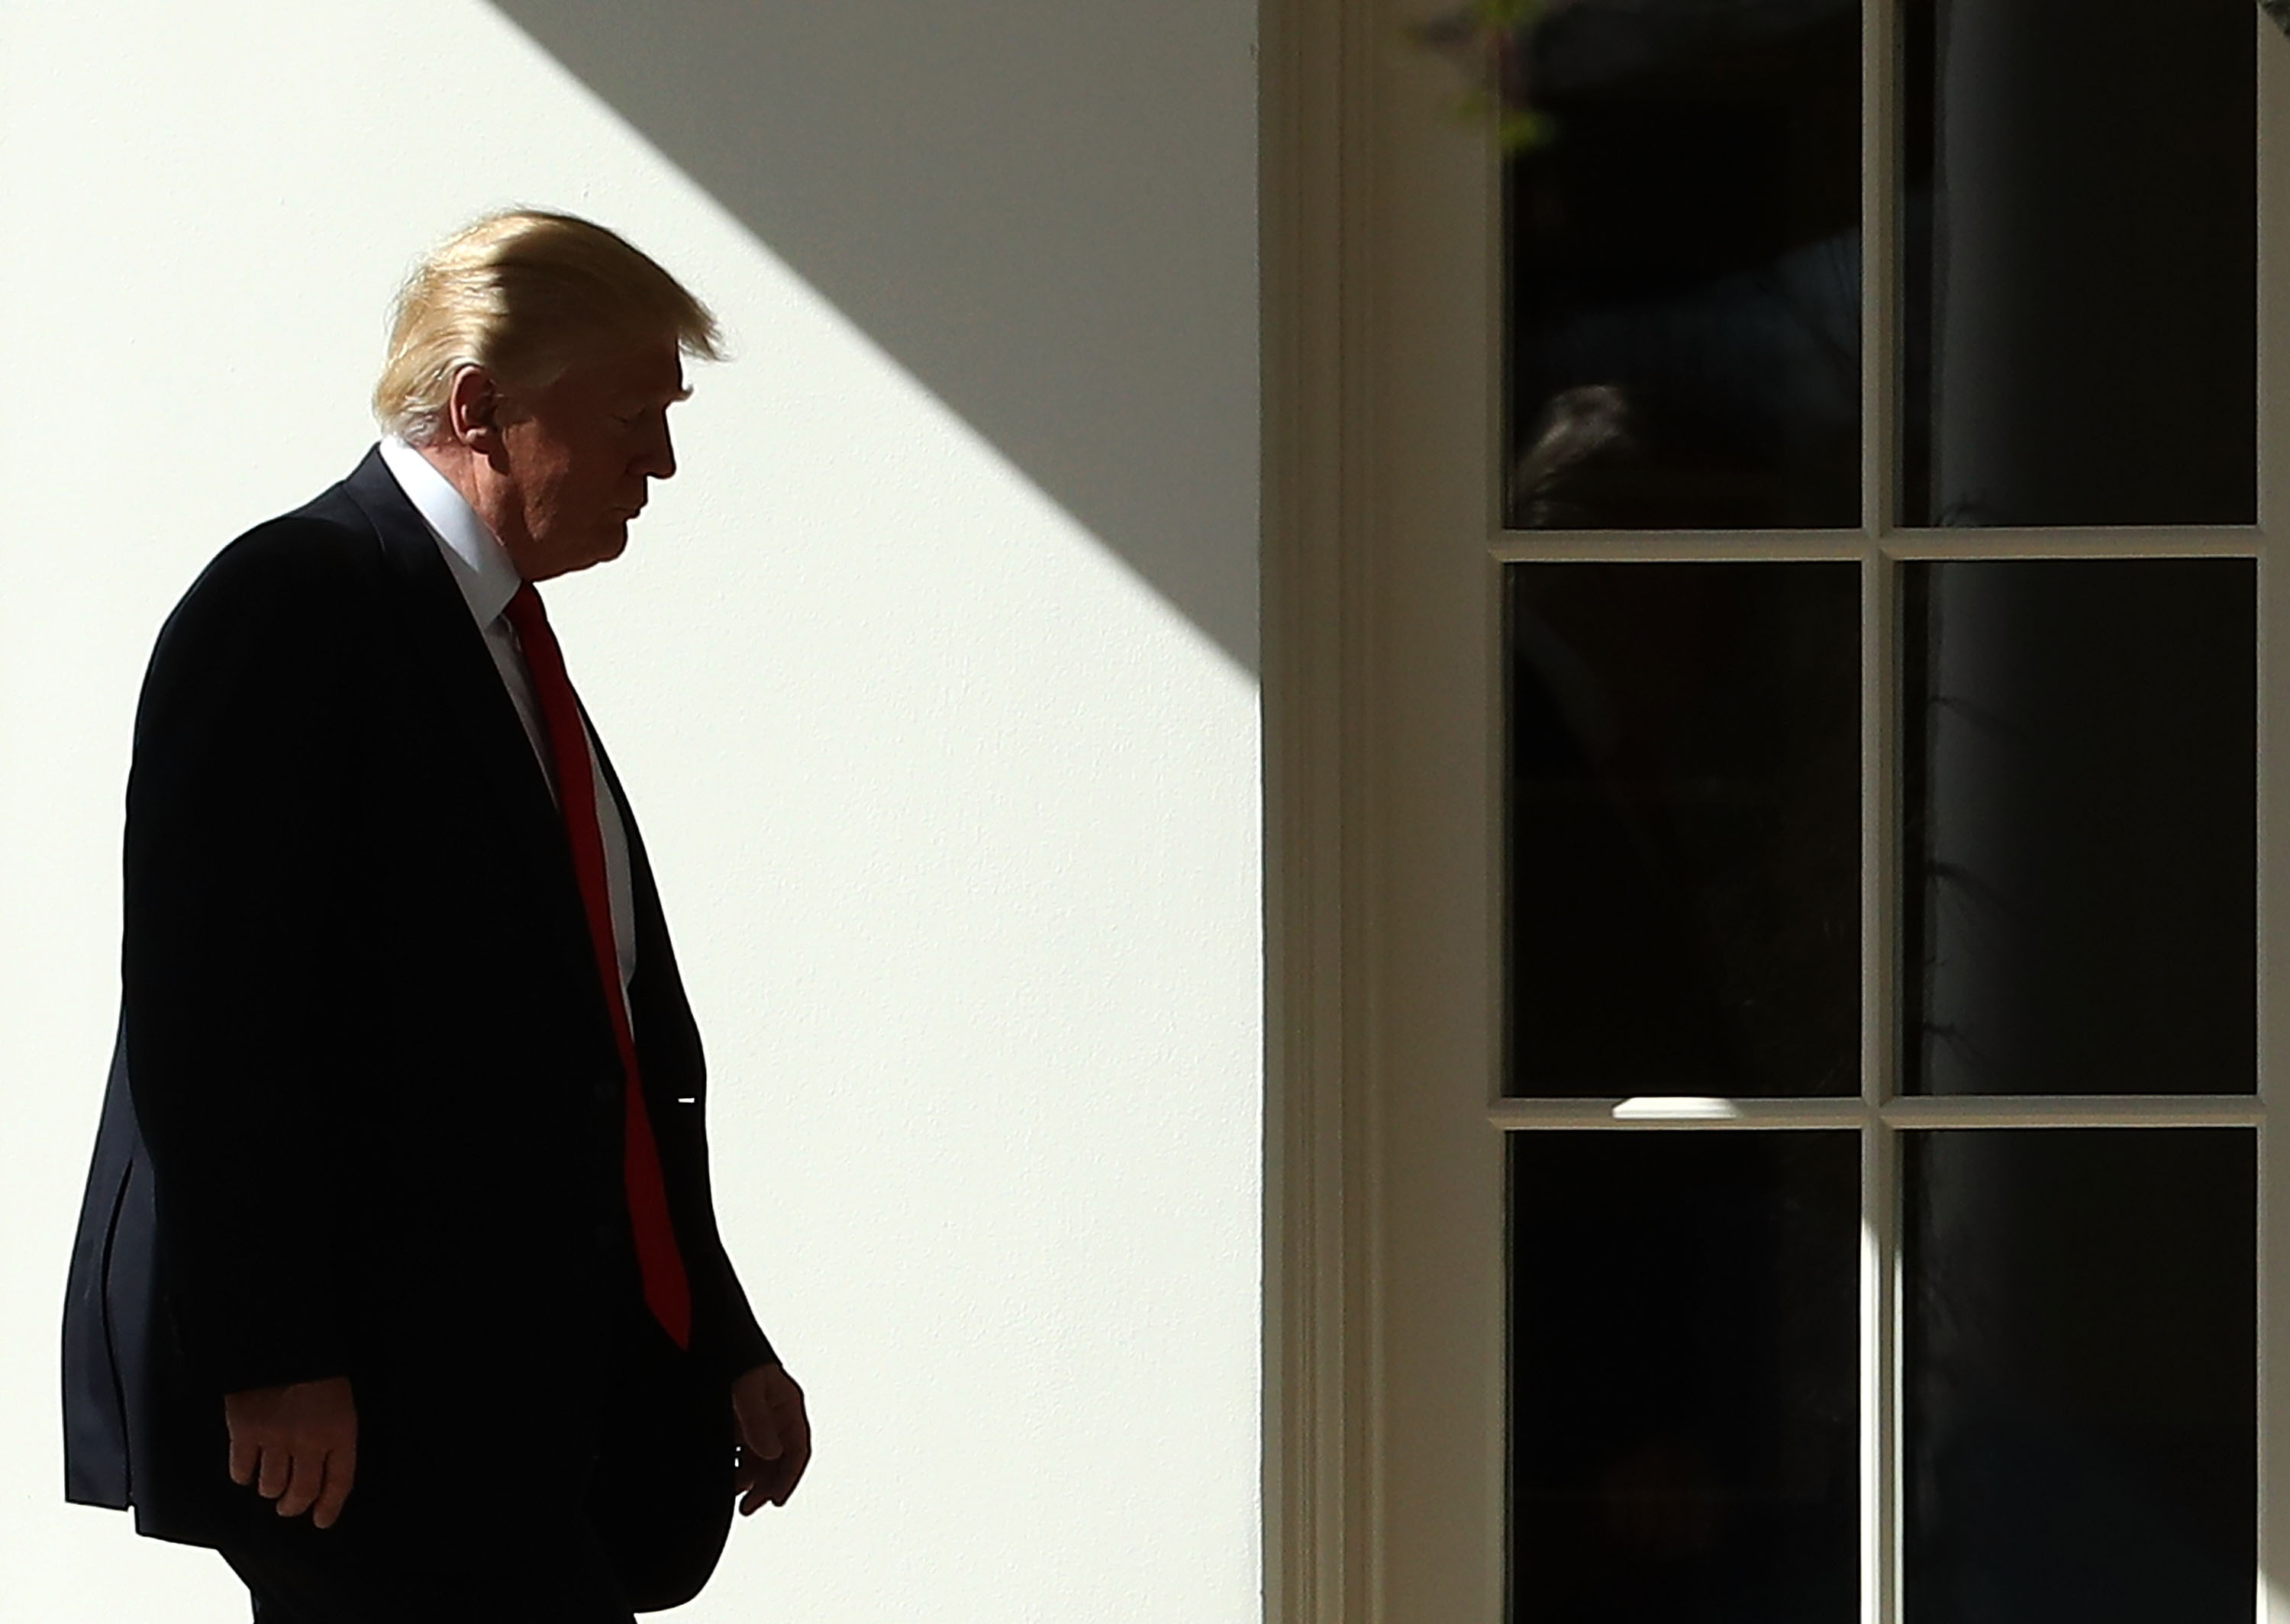 President Trump walks to the Oval Office at the White House, on Feb. 24, 2017. (Mark Wilson—Getty Images)